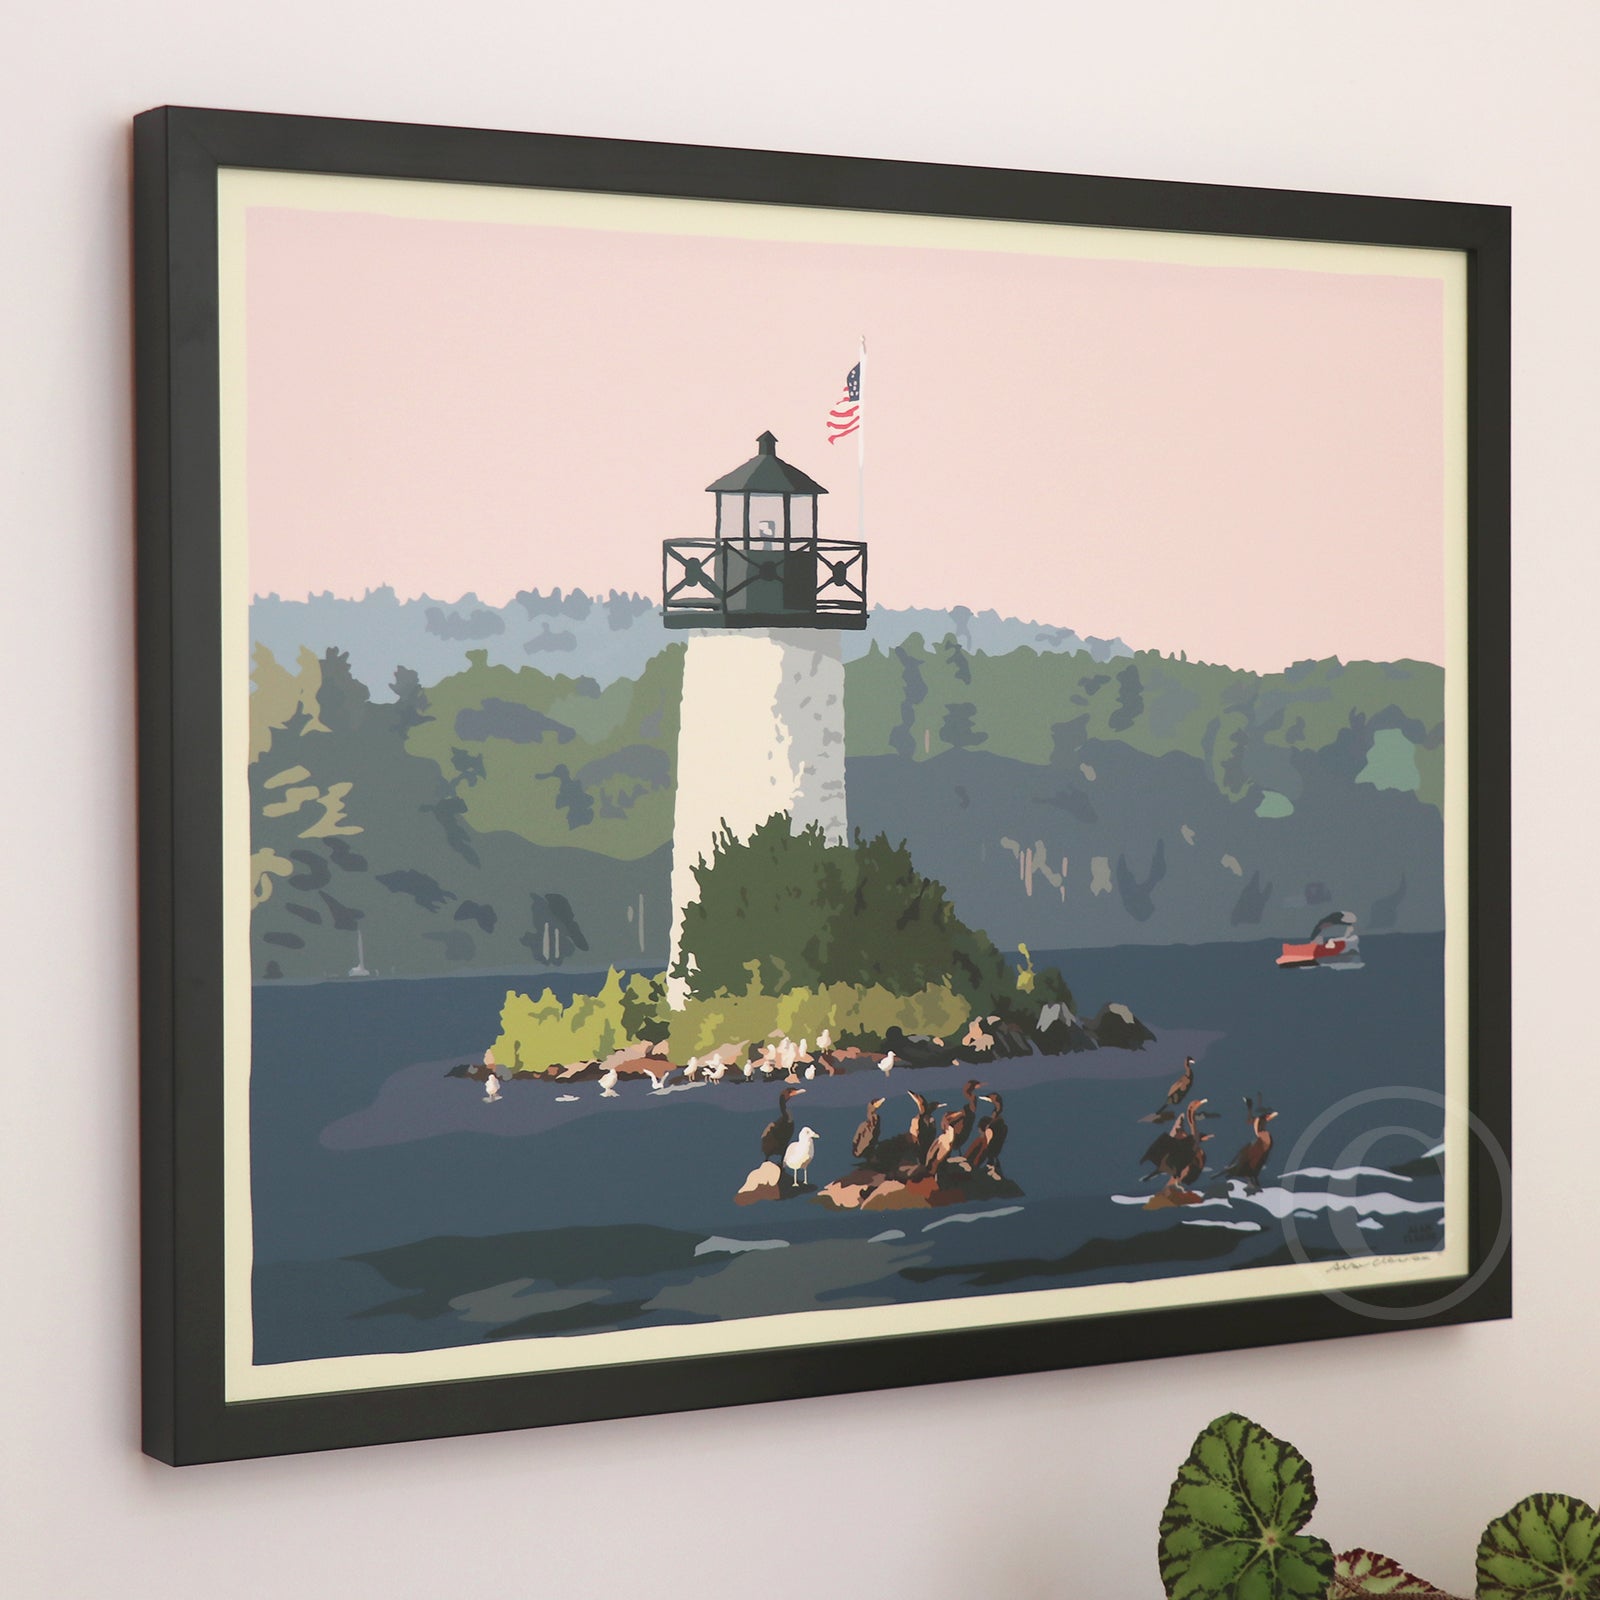 Sunset at Ladies Delight Lighthouse Art Print 18" x 24” Horizontal Framed Wall Poster By Alan Claude - Maine